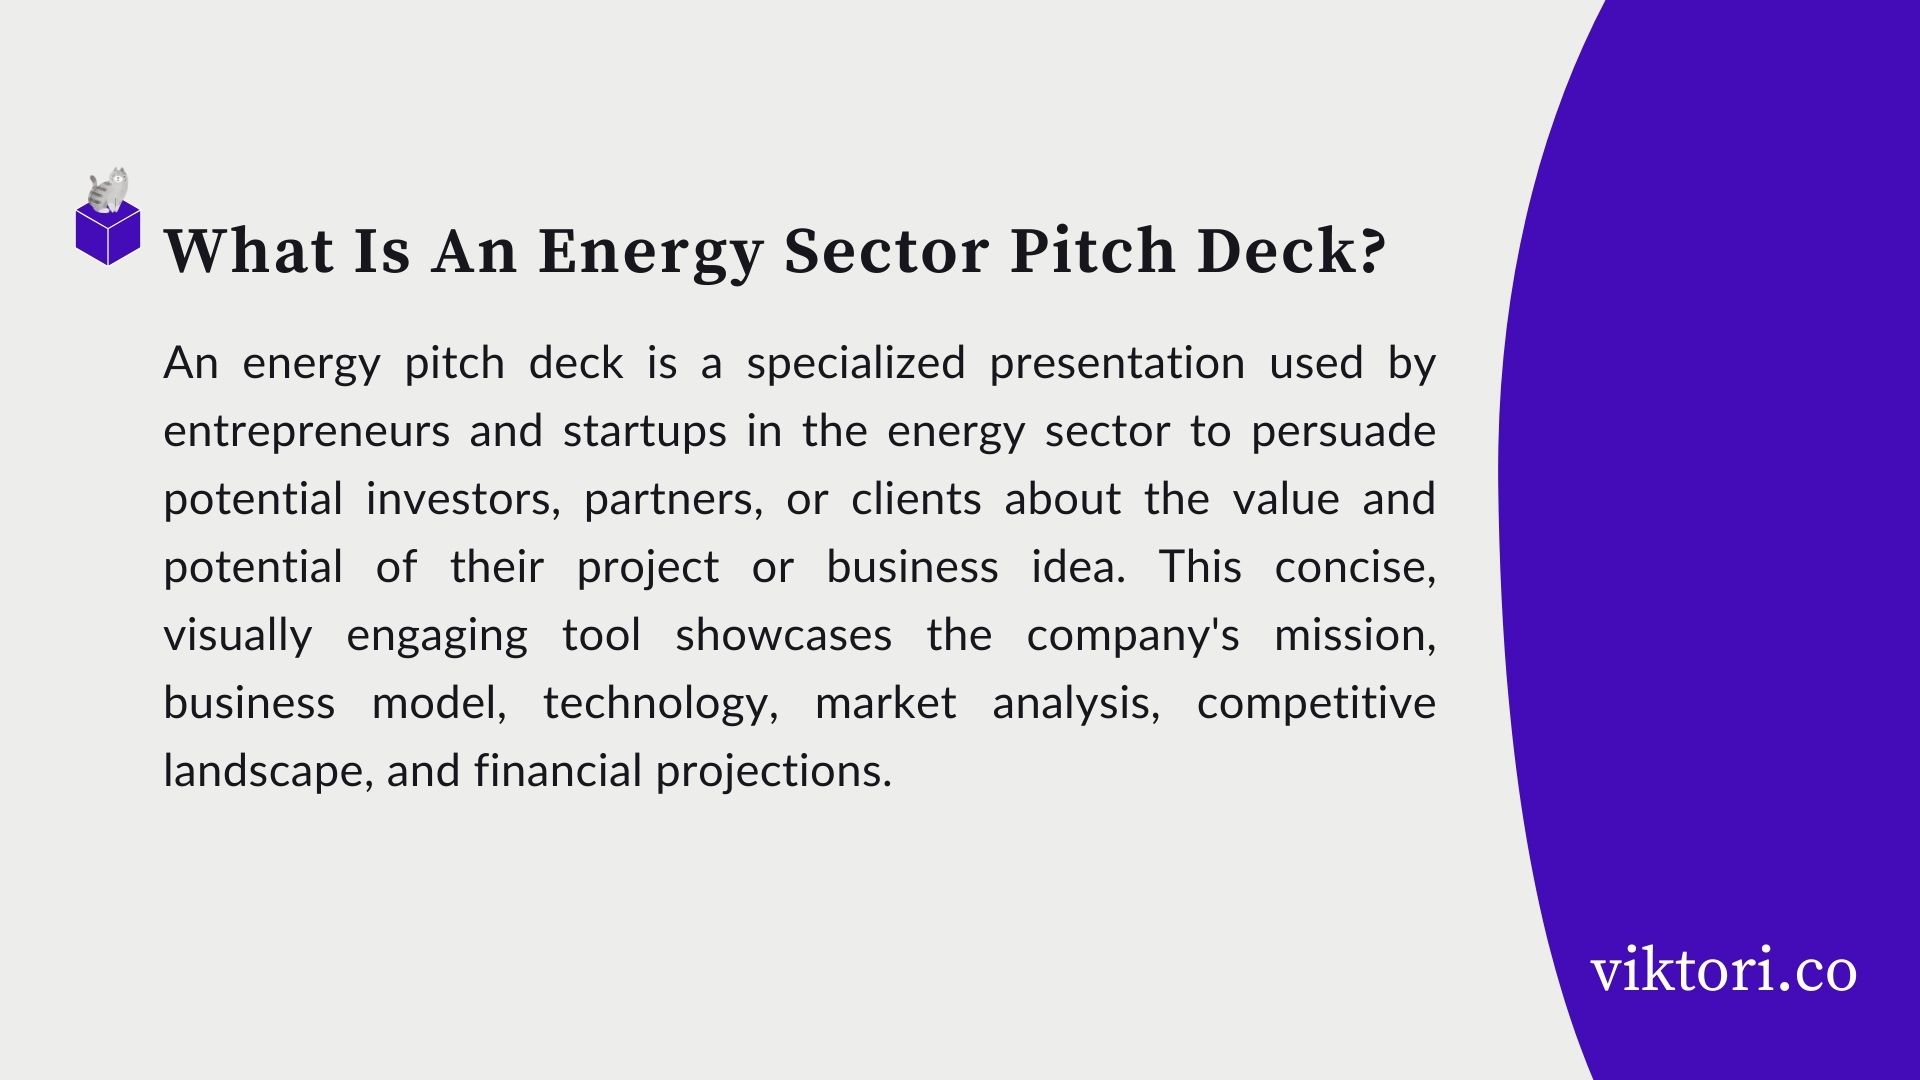 energy sector pitch deck definition